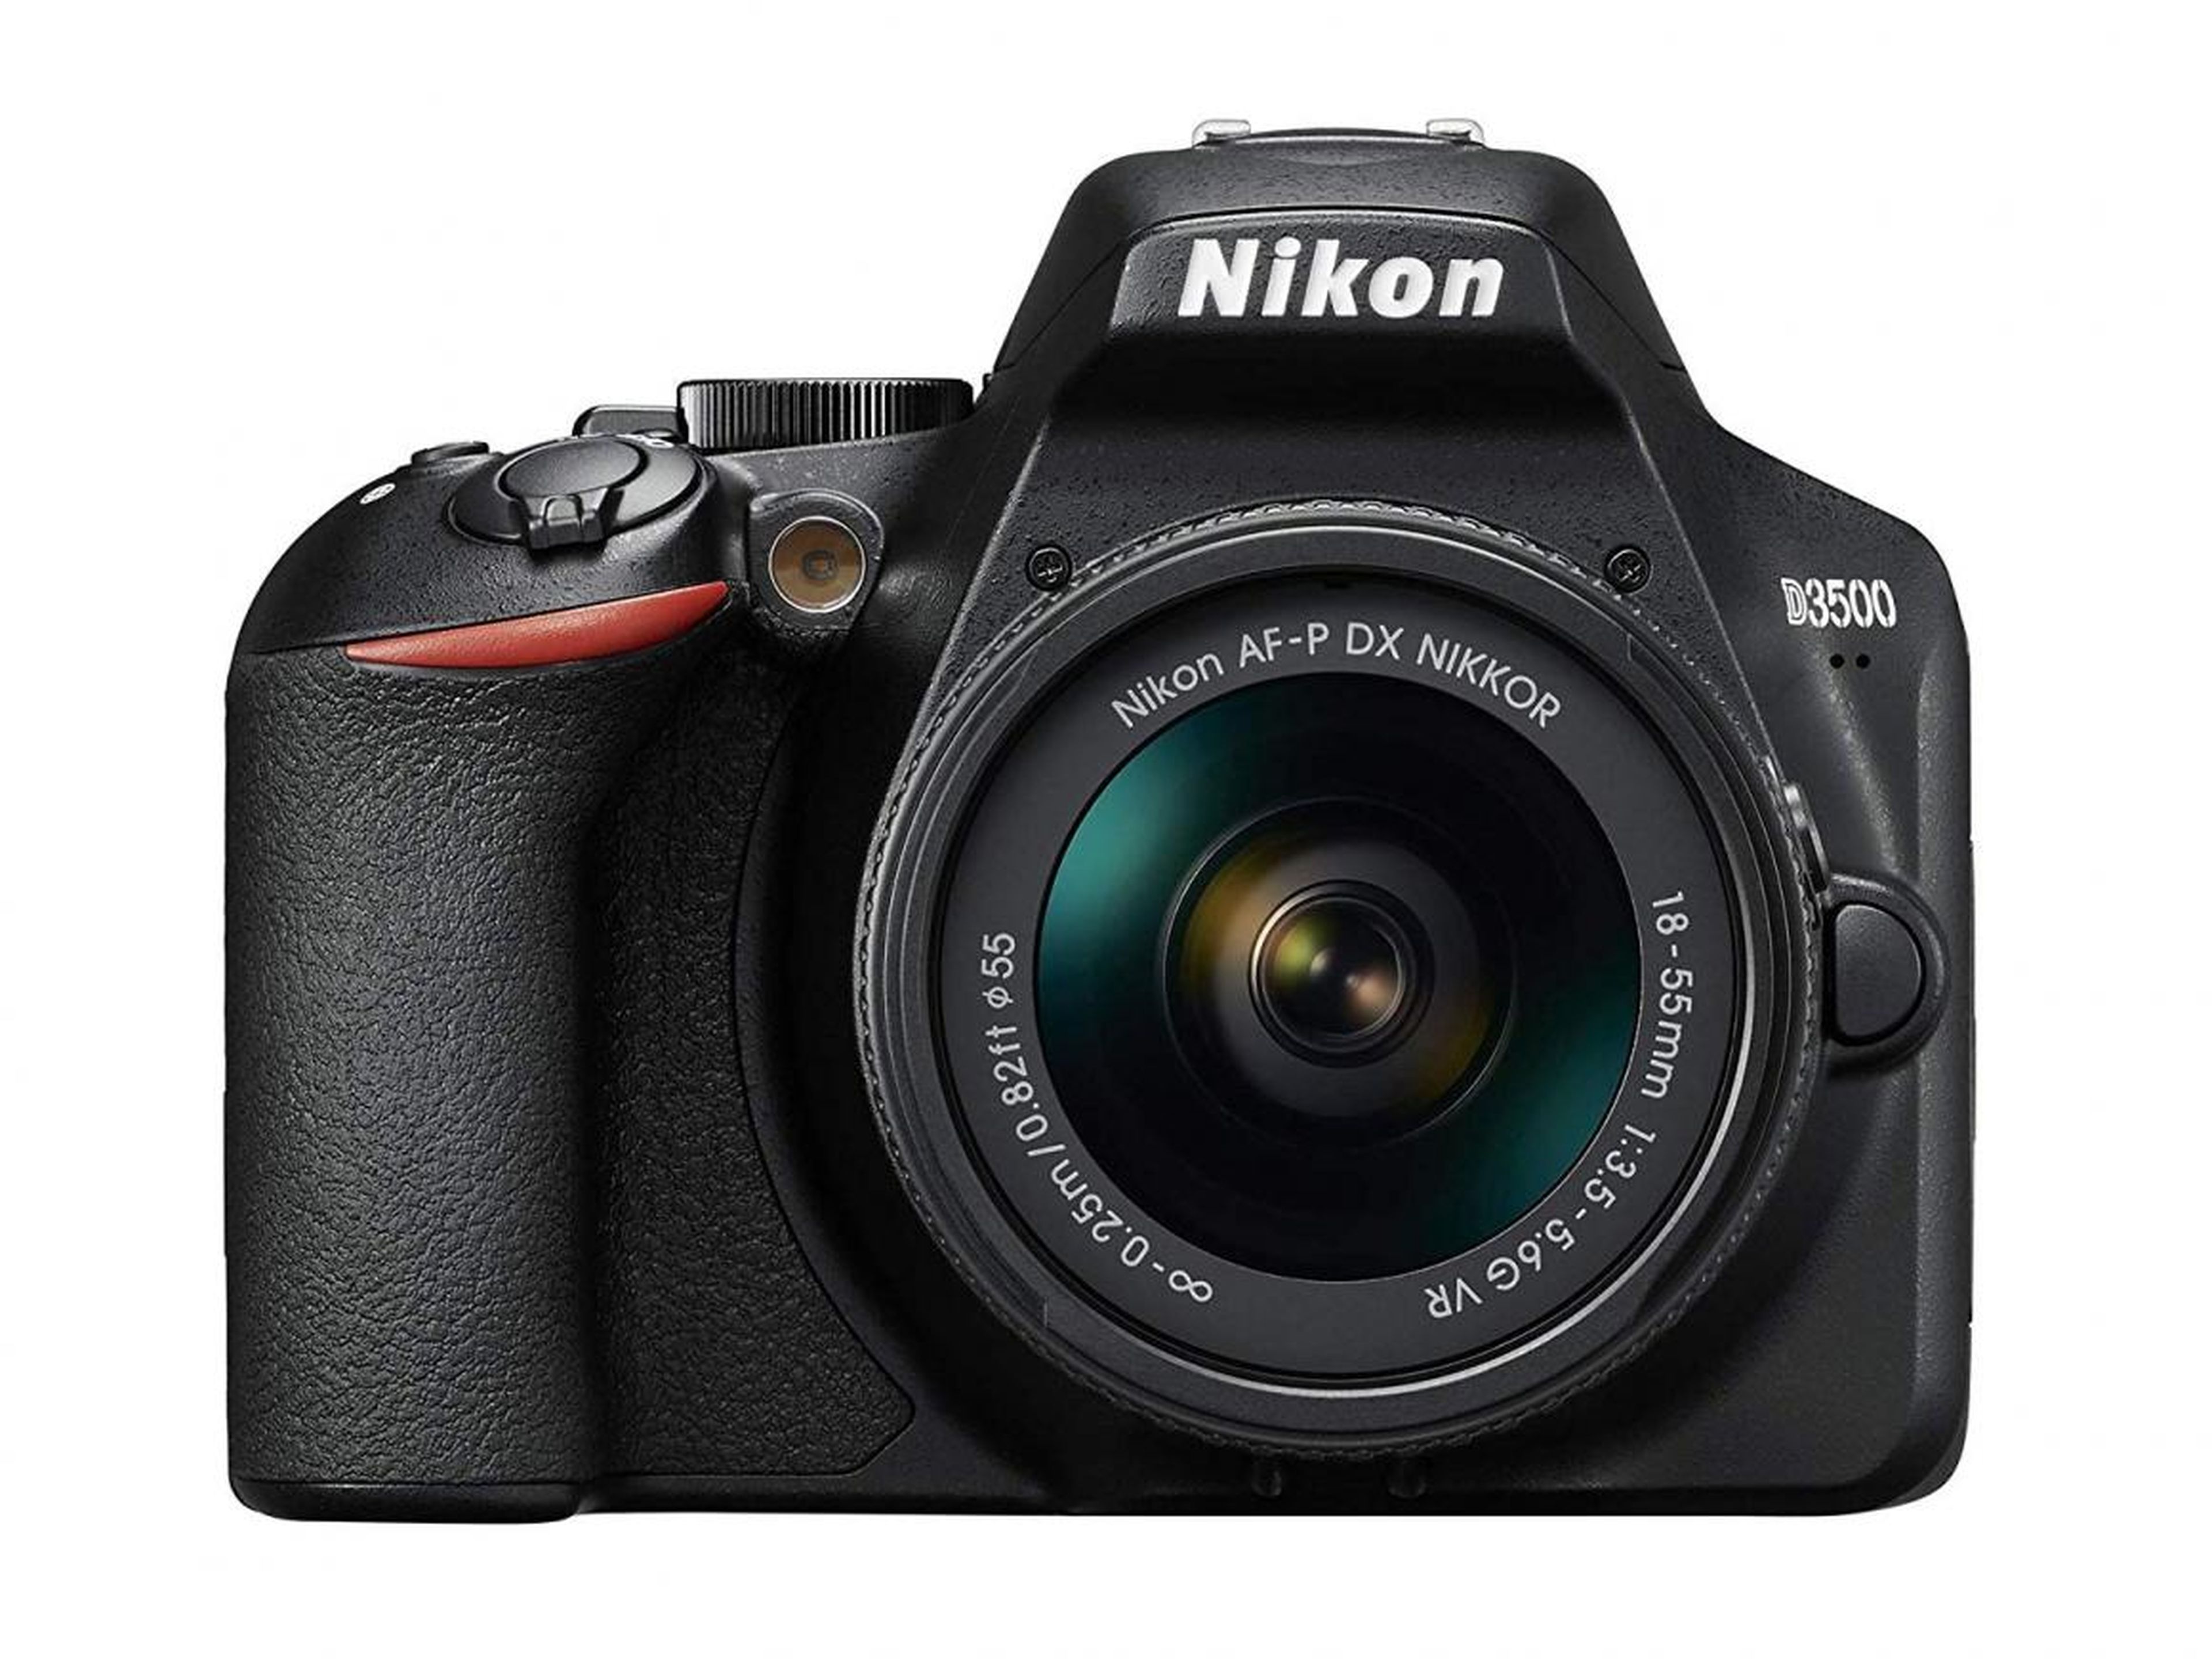 A top-of-the-line entry-level advanced camera